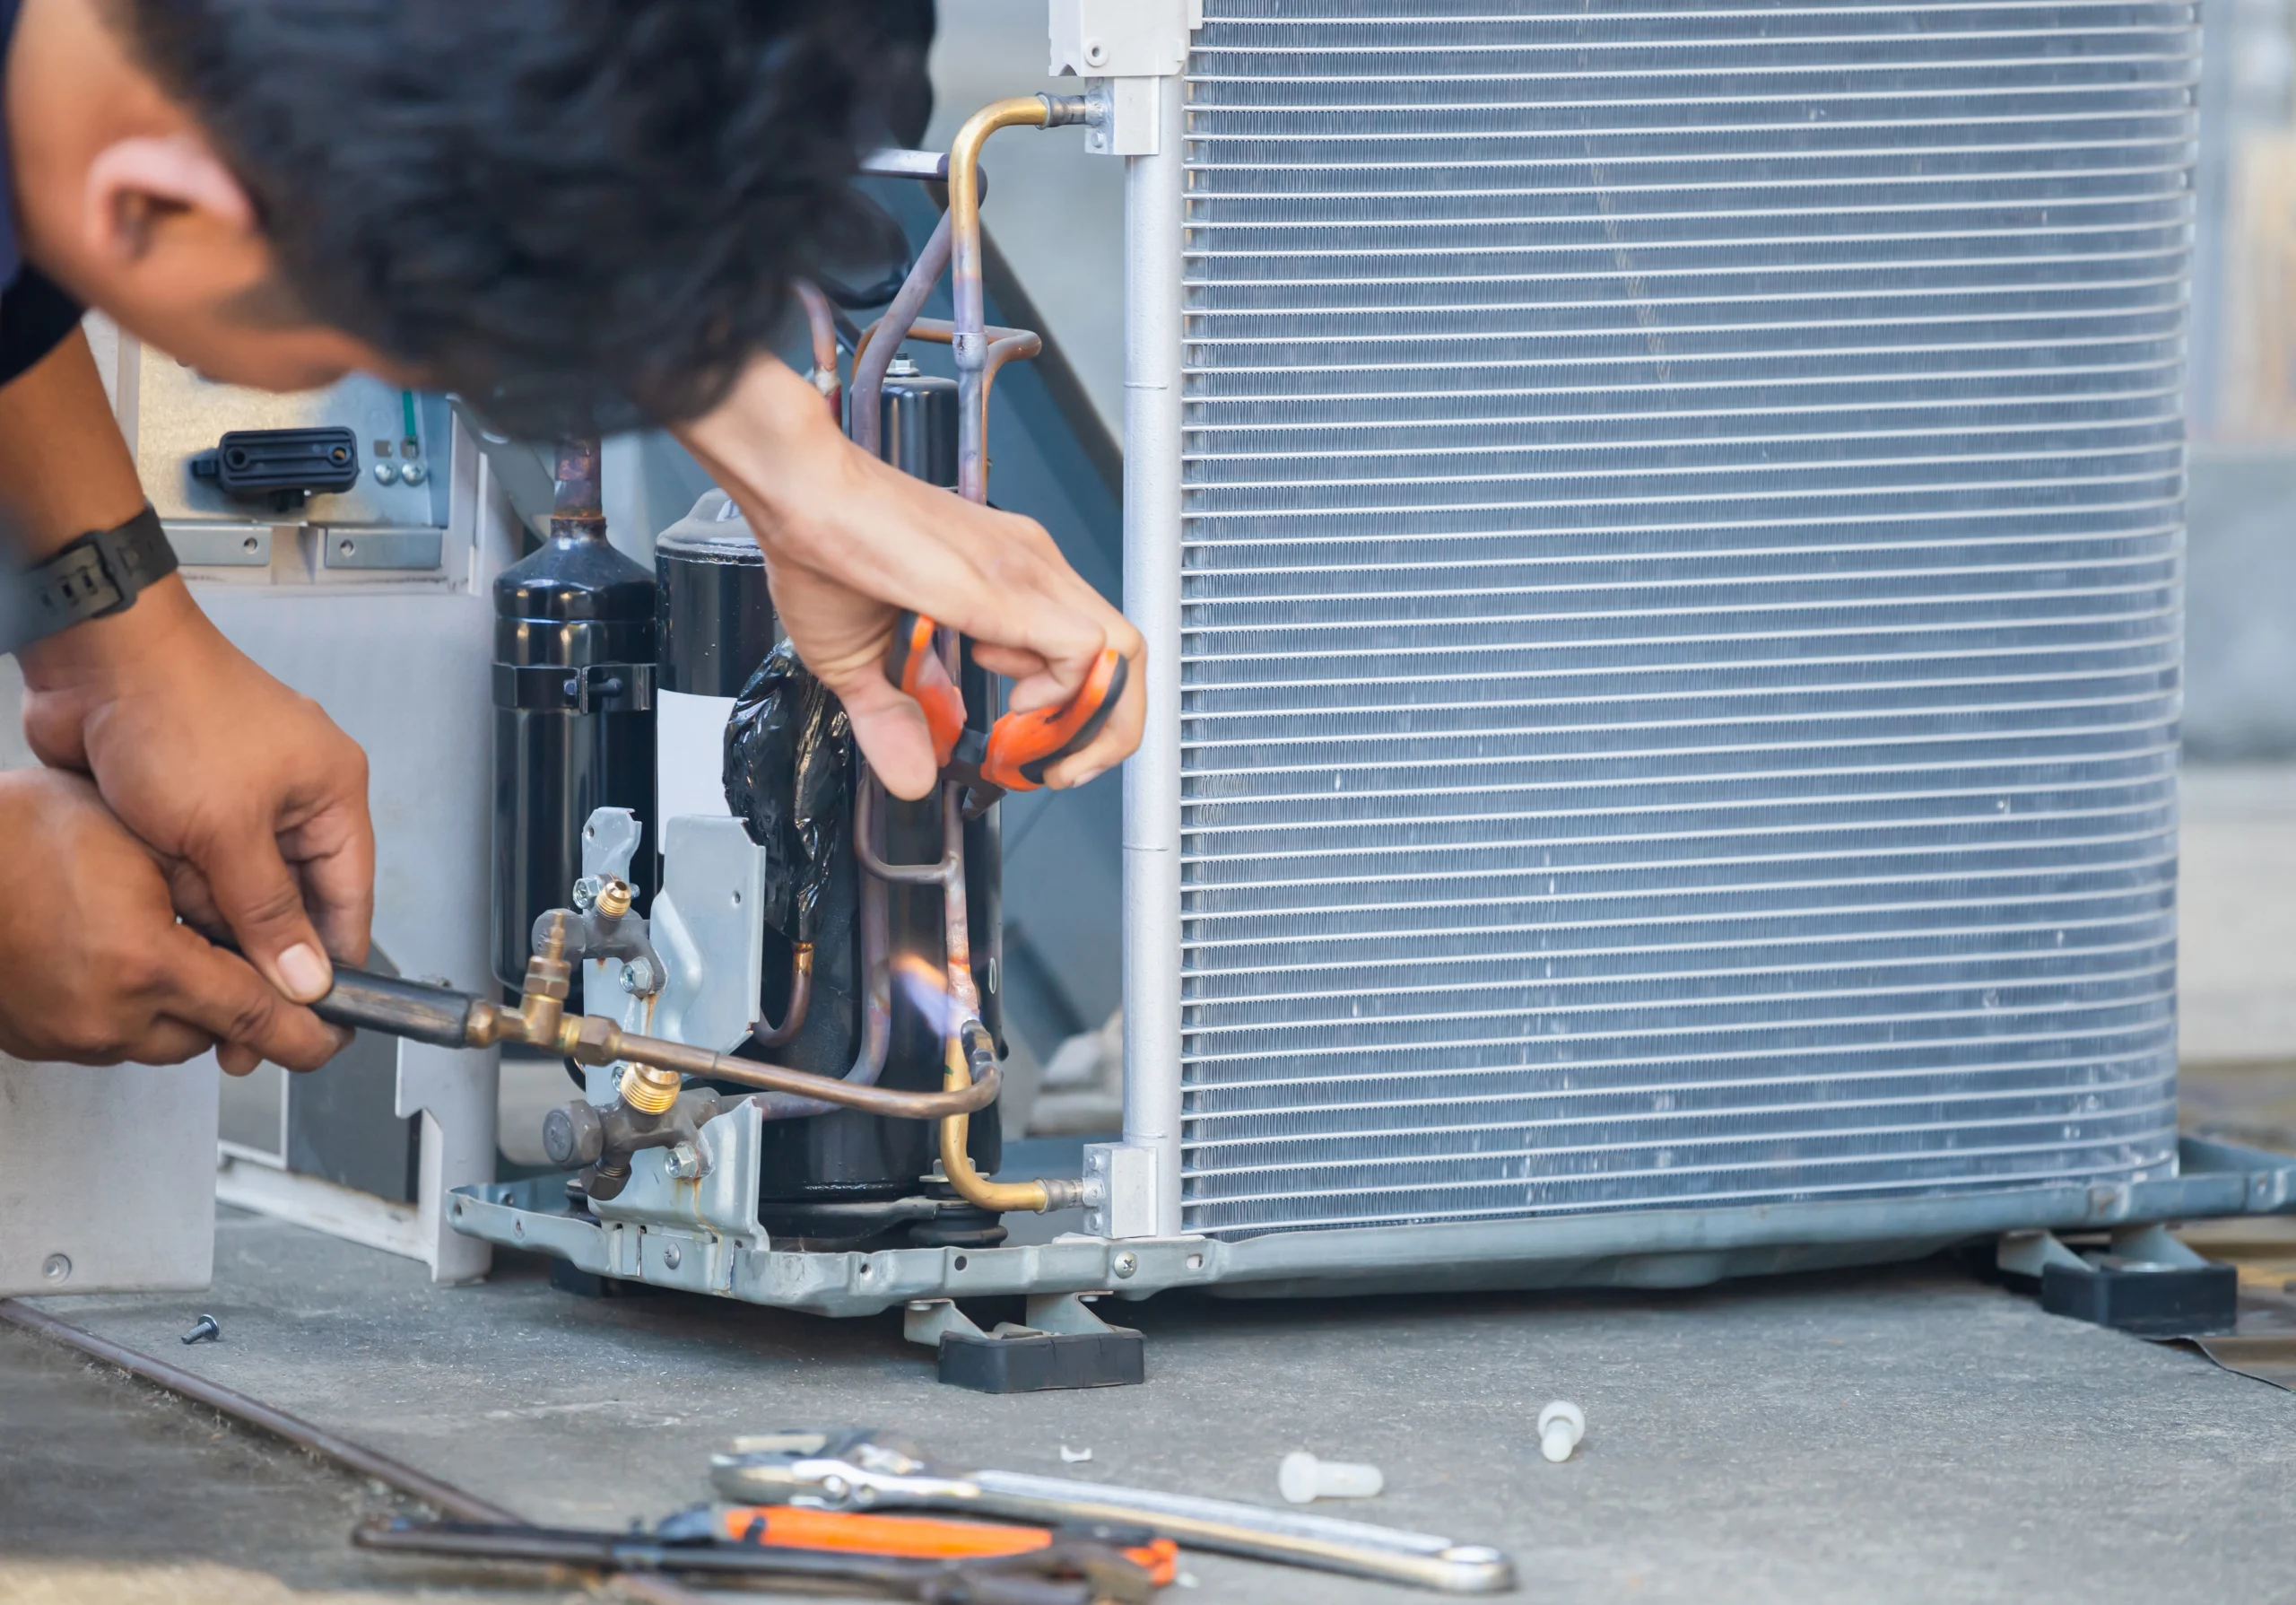 An HVAC technician fixing an air conditioner, using tools to repair the unit. Soldering copper tubing.